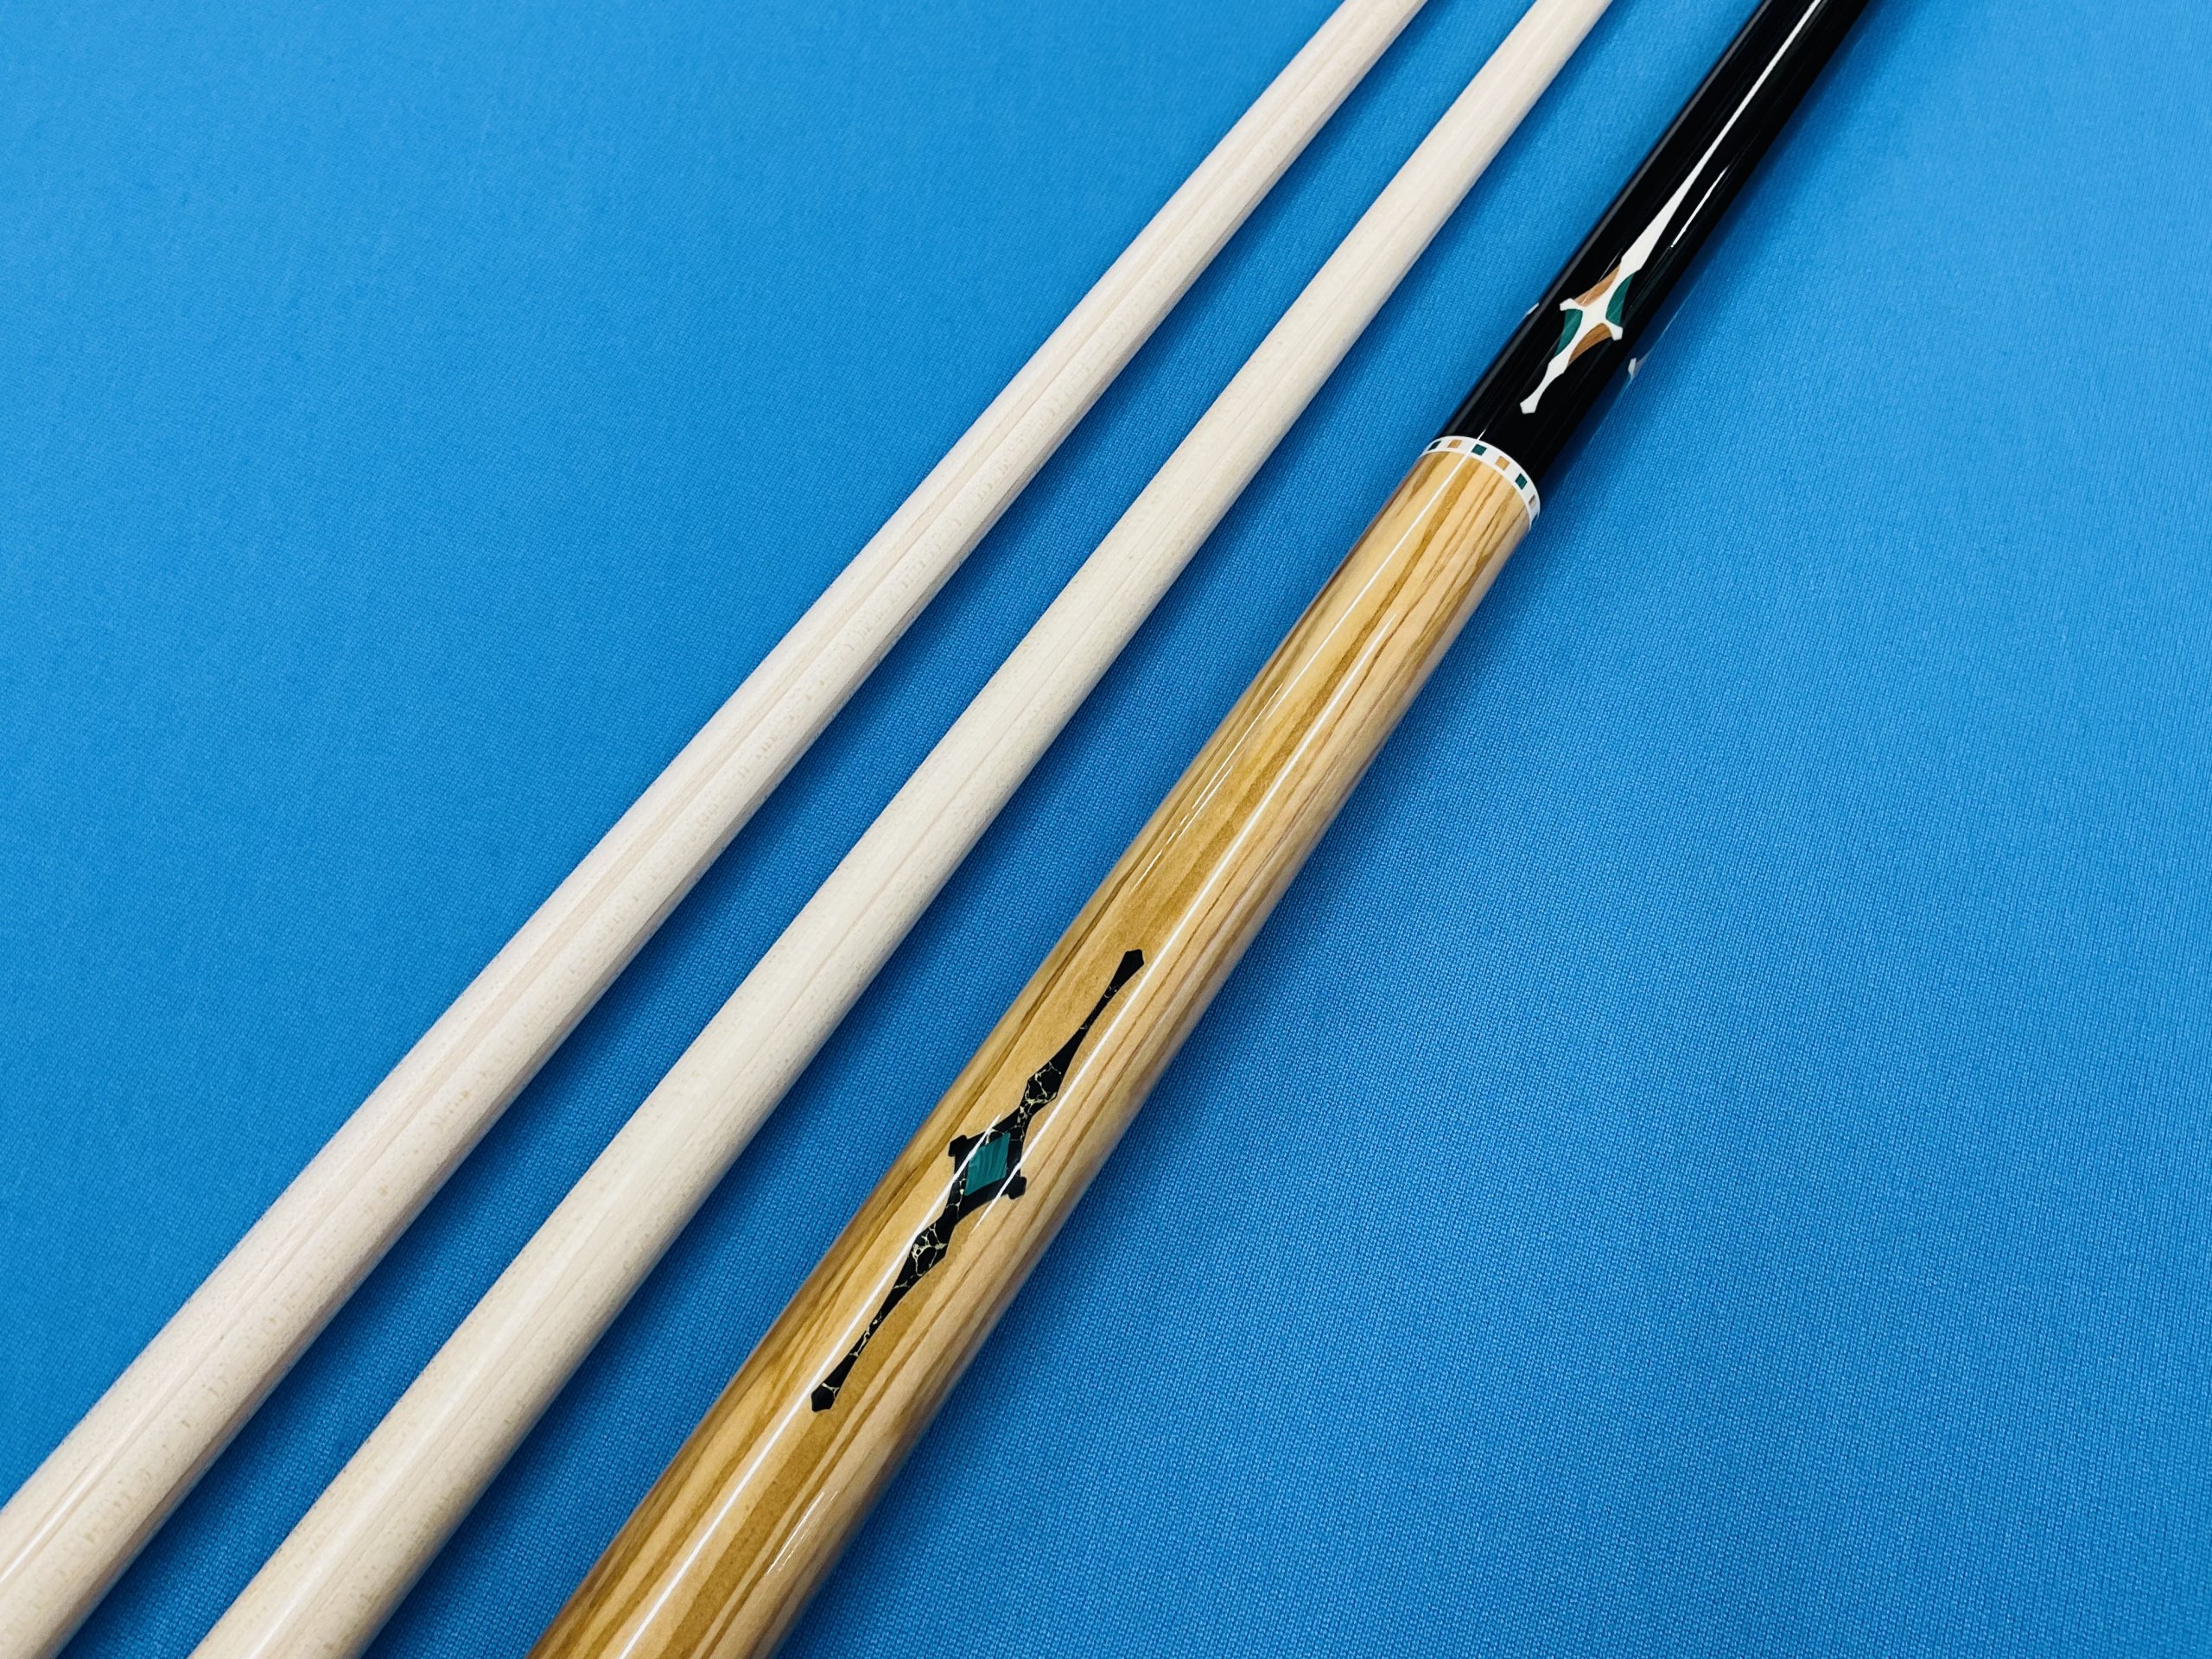 LONGONI CAROM CUE THE KING WITH S20 E71 SHAFTS. - California Billiards ...